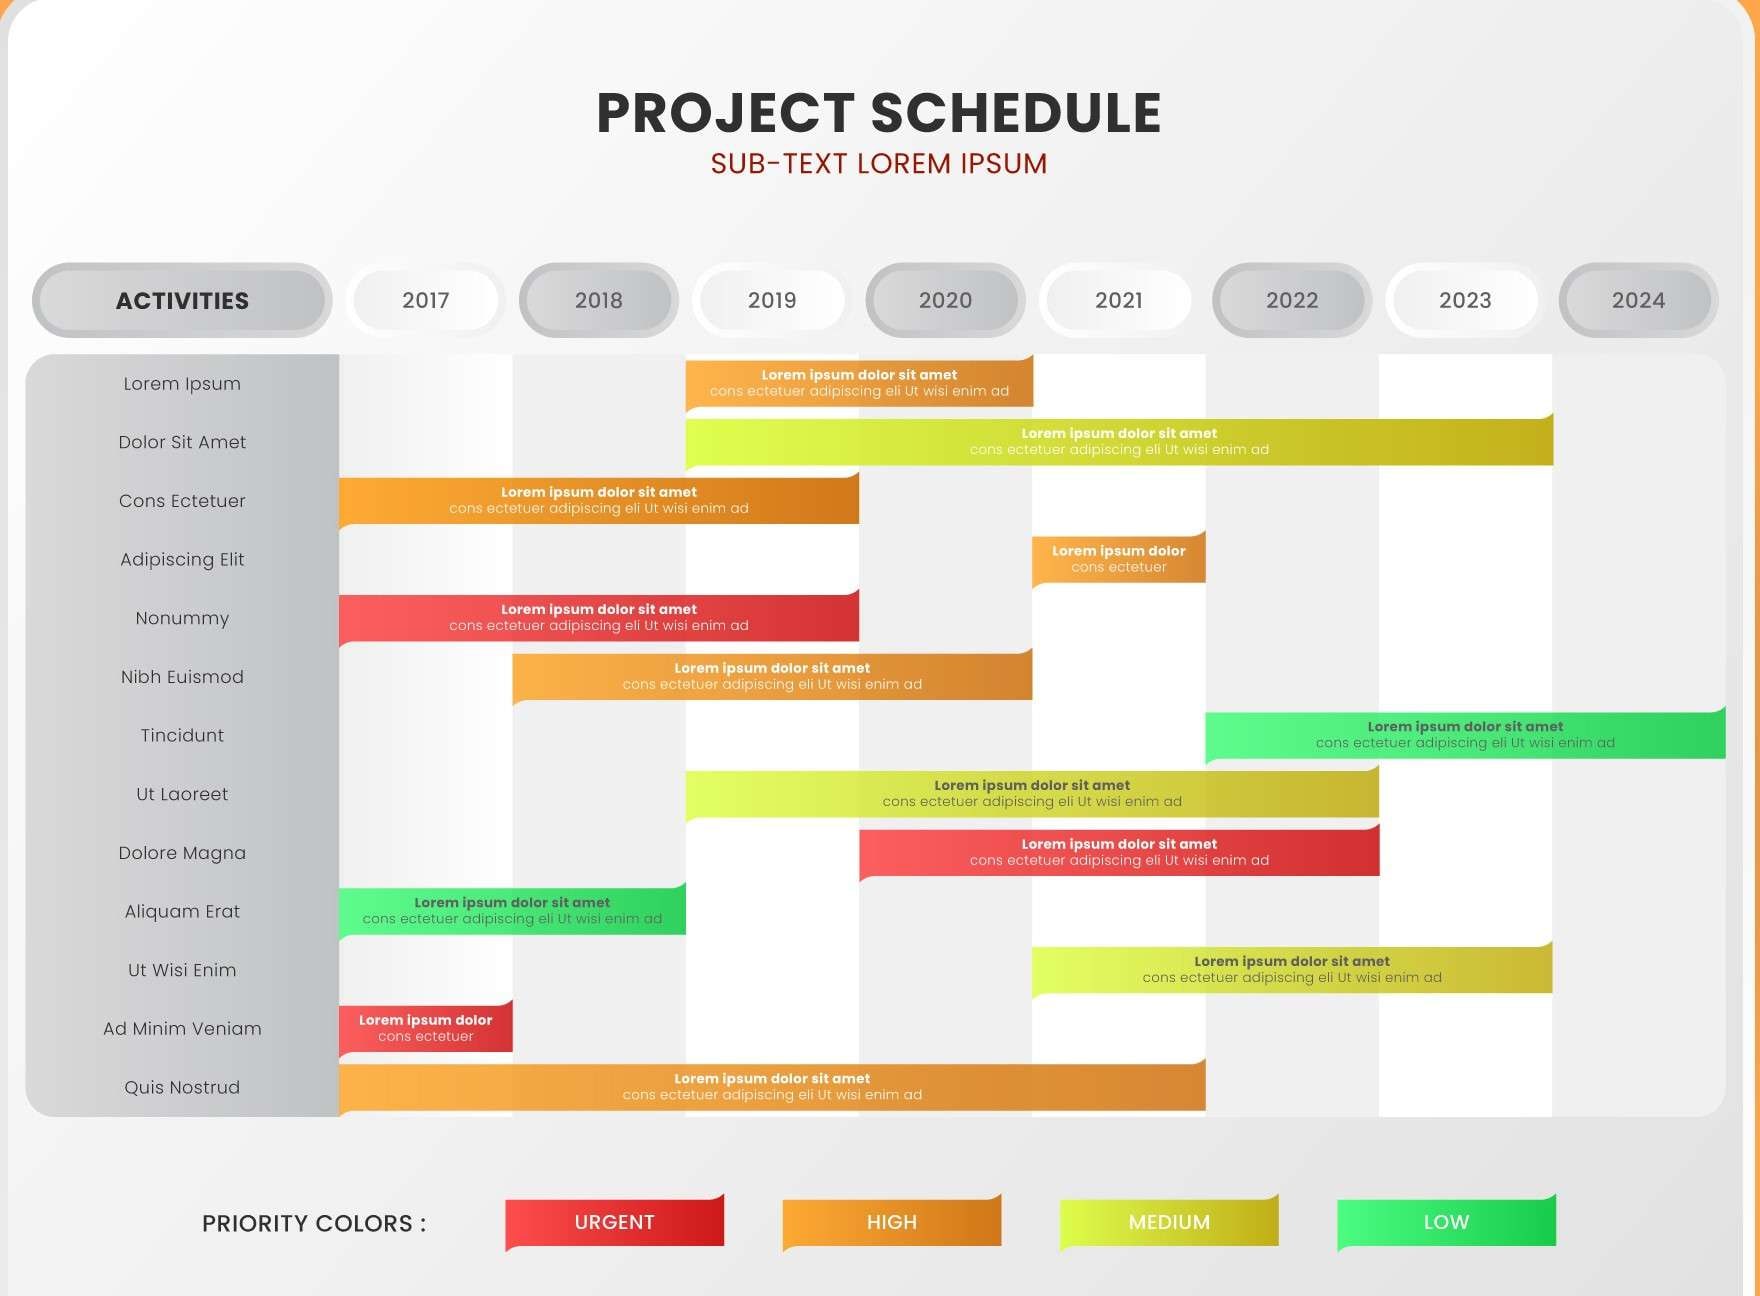 A sample of a project schedule showing activities, timelines, and priority in different colors